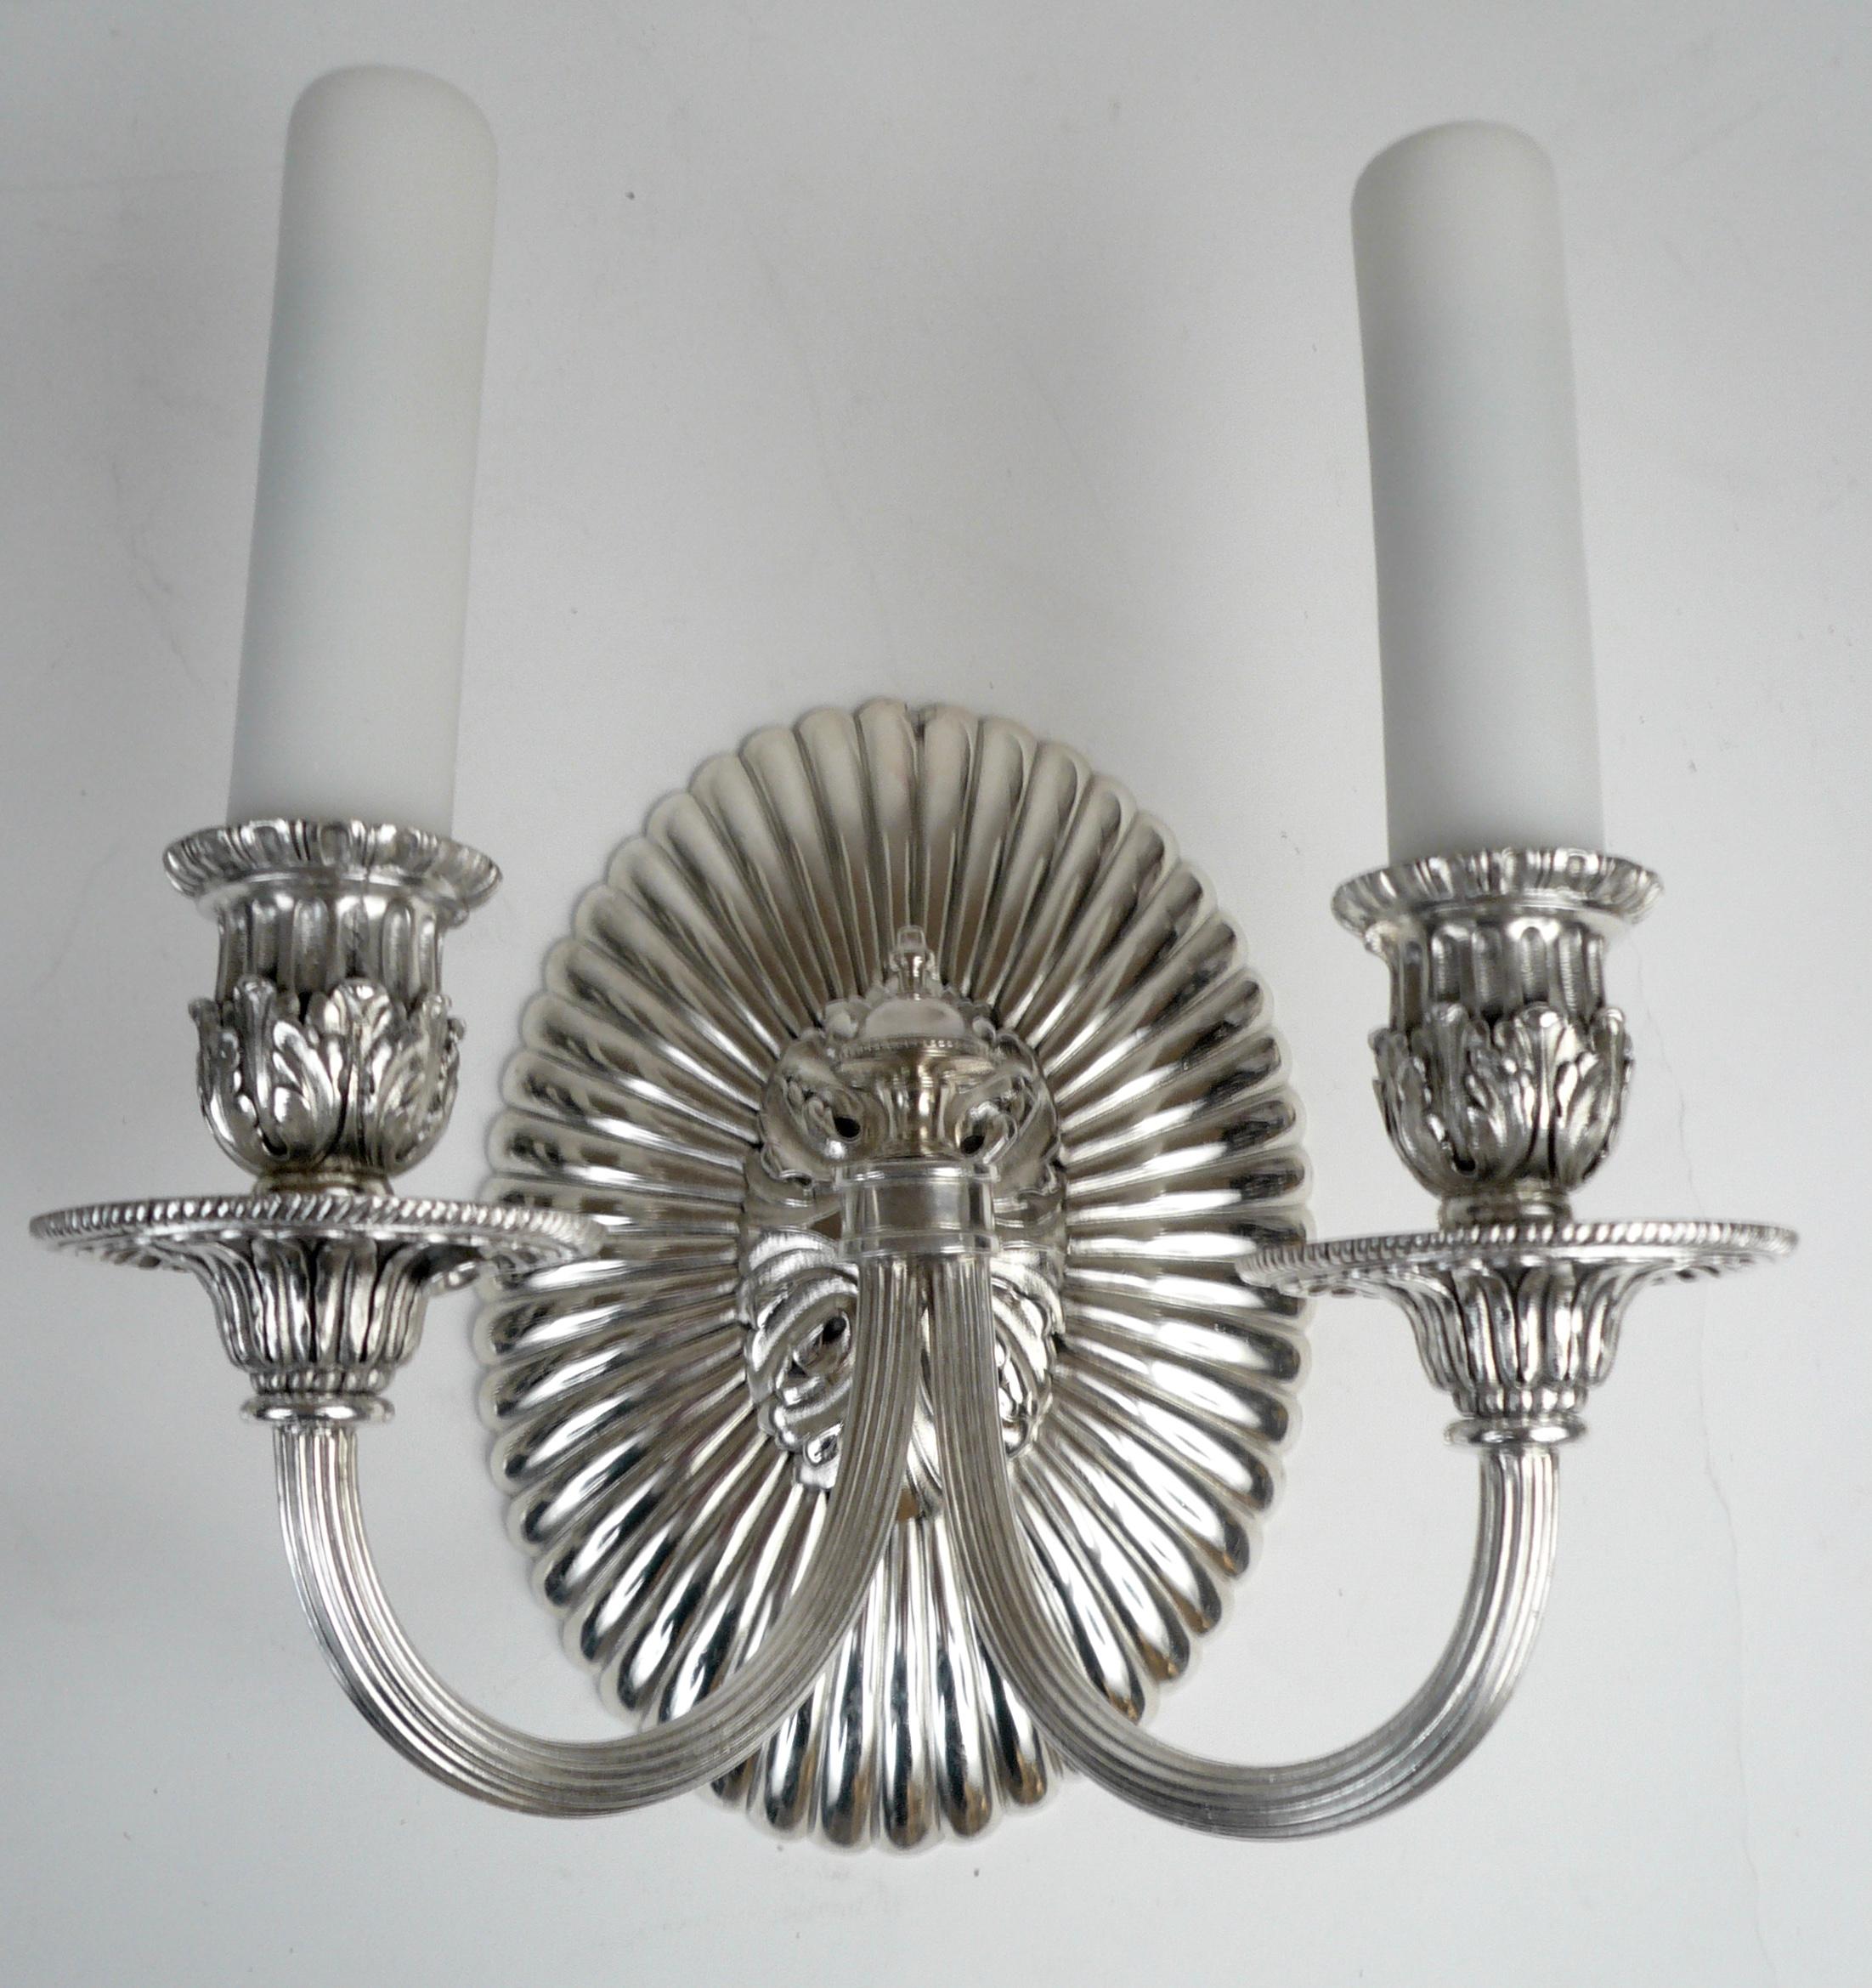 This impressive pair of twin arm bronze sconces retain their original silver palting and have been newly rewired, and are ready to use.
They are finely cast and feature classical motifs including beaded borders, and acanthus leaves.